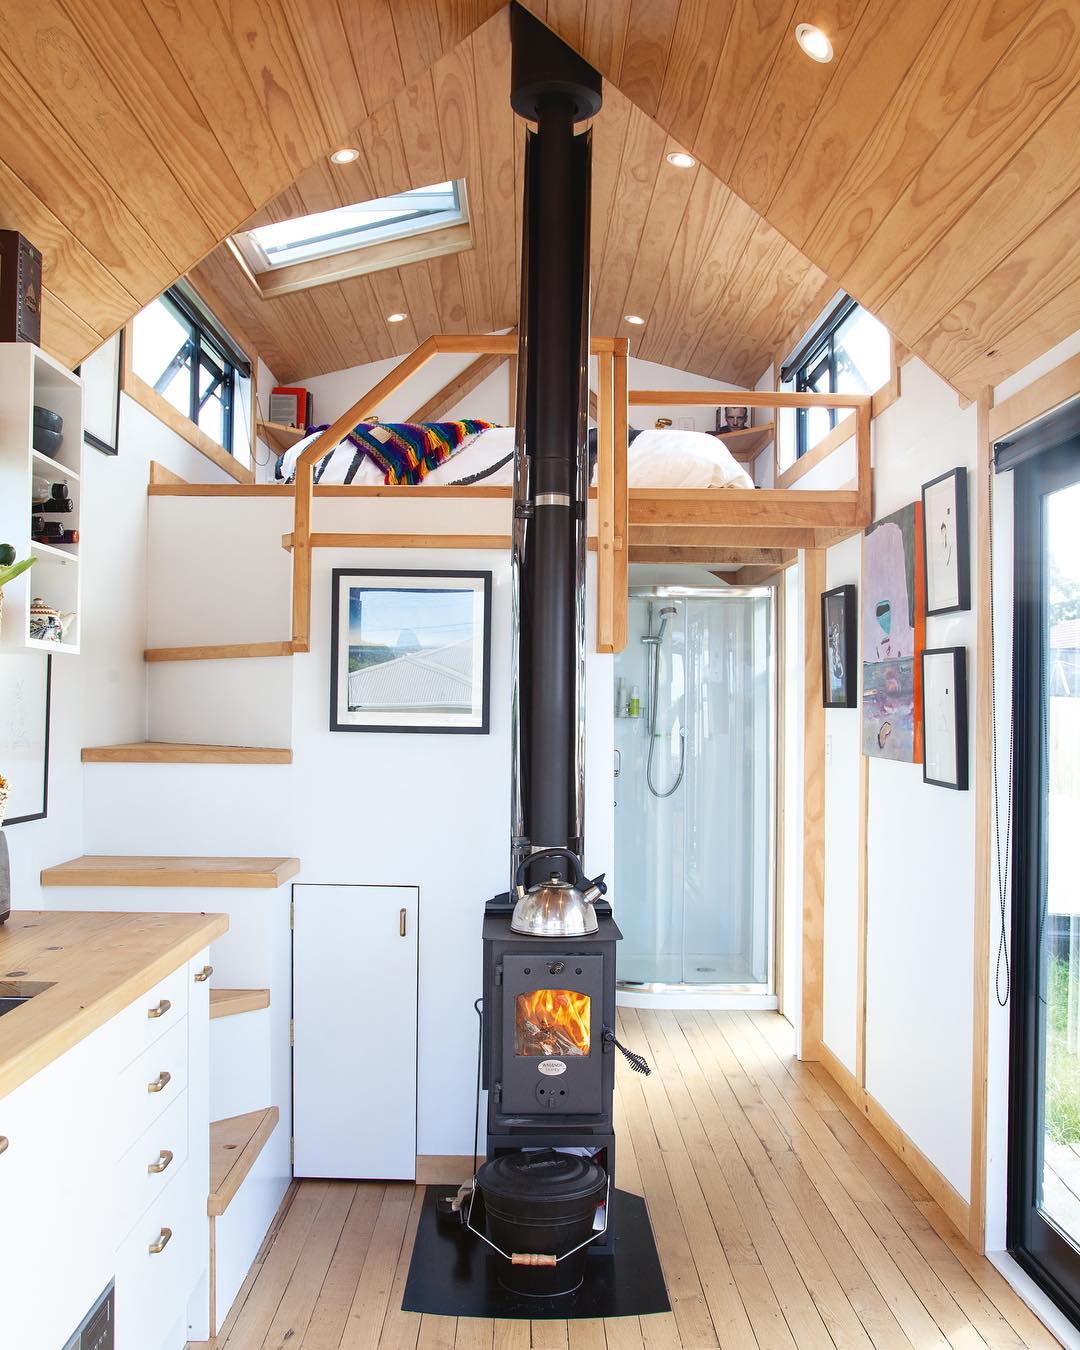 https://www.extraspace.com/blog/wp-content/uploads/2019/11/lofted-bed-design-tiny-homes.jpg